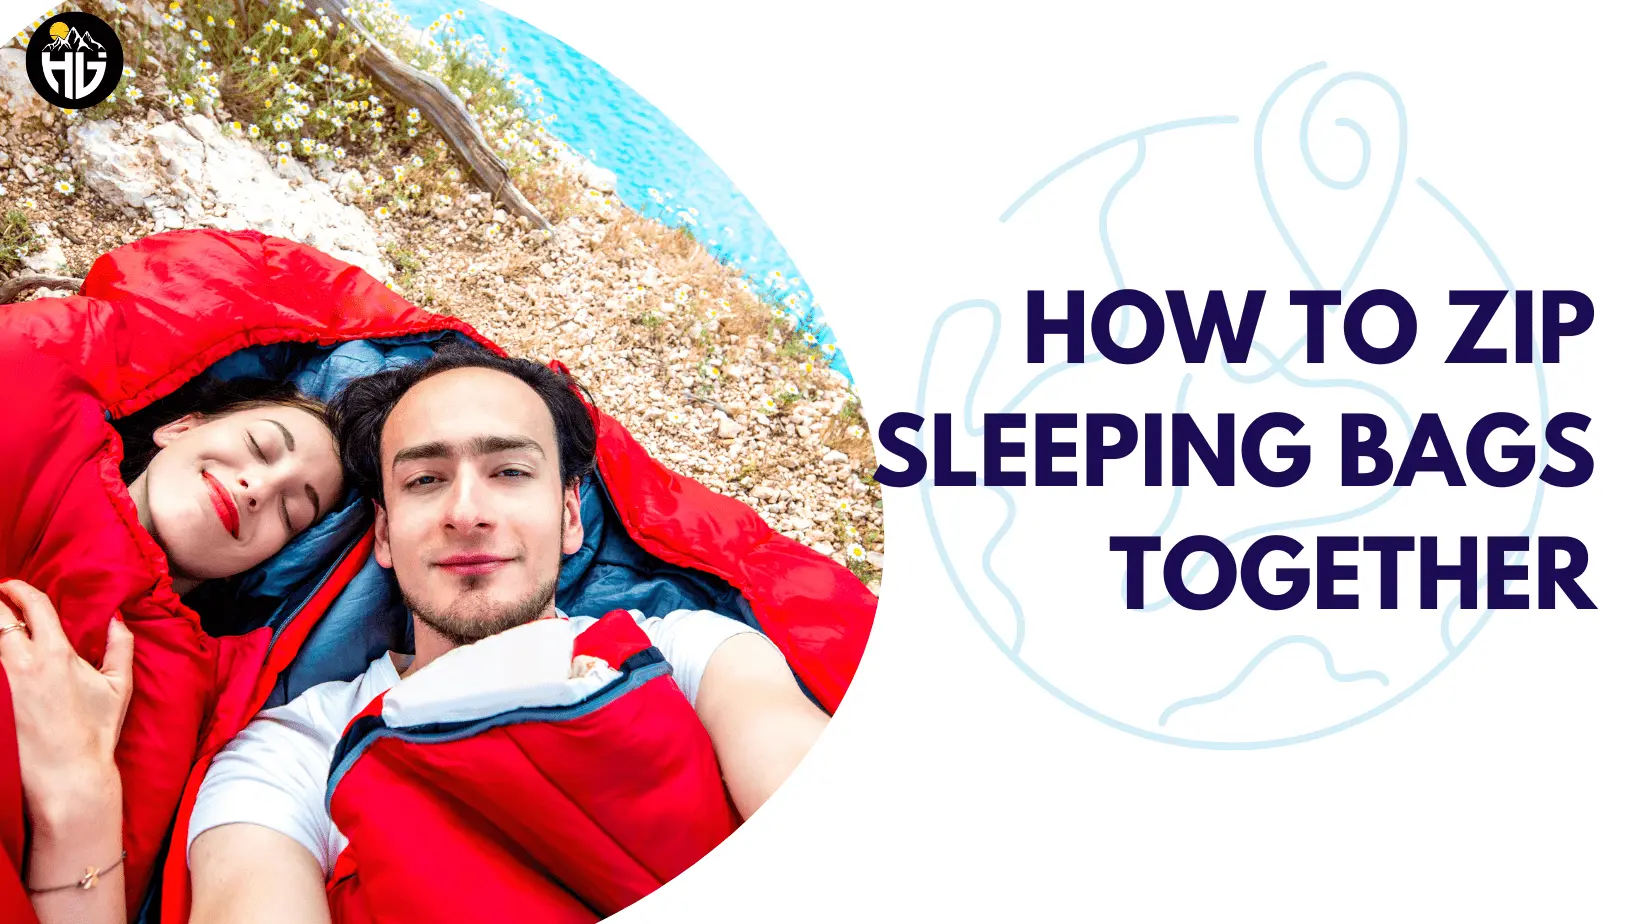 How to Zip Sleeping Bags Together